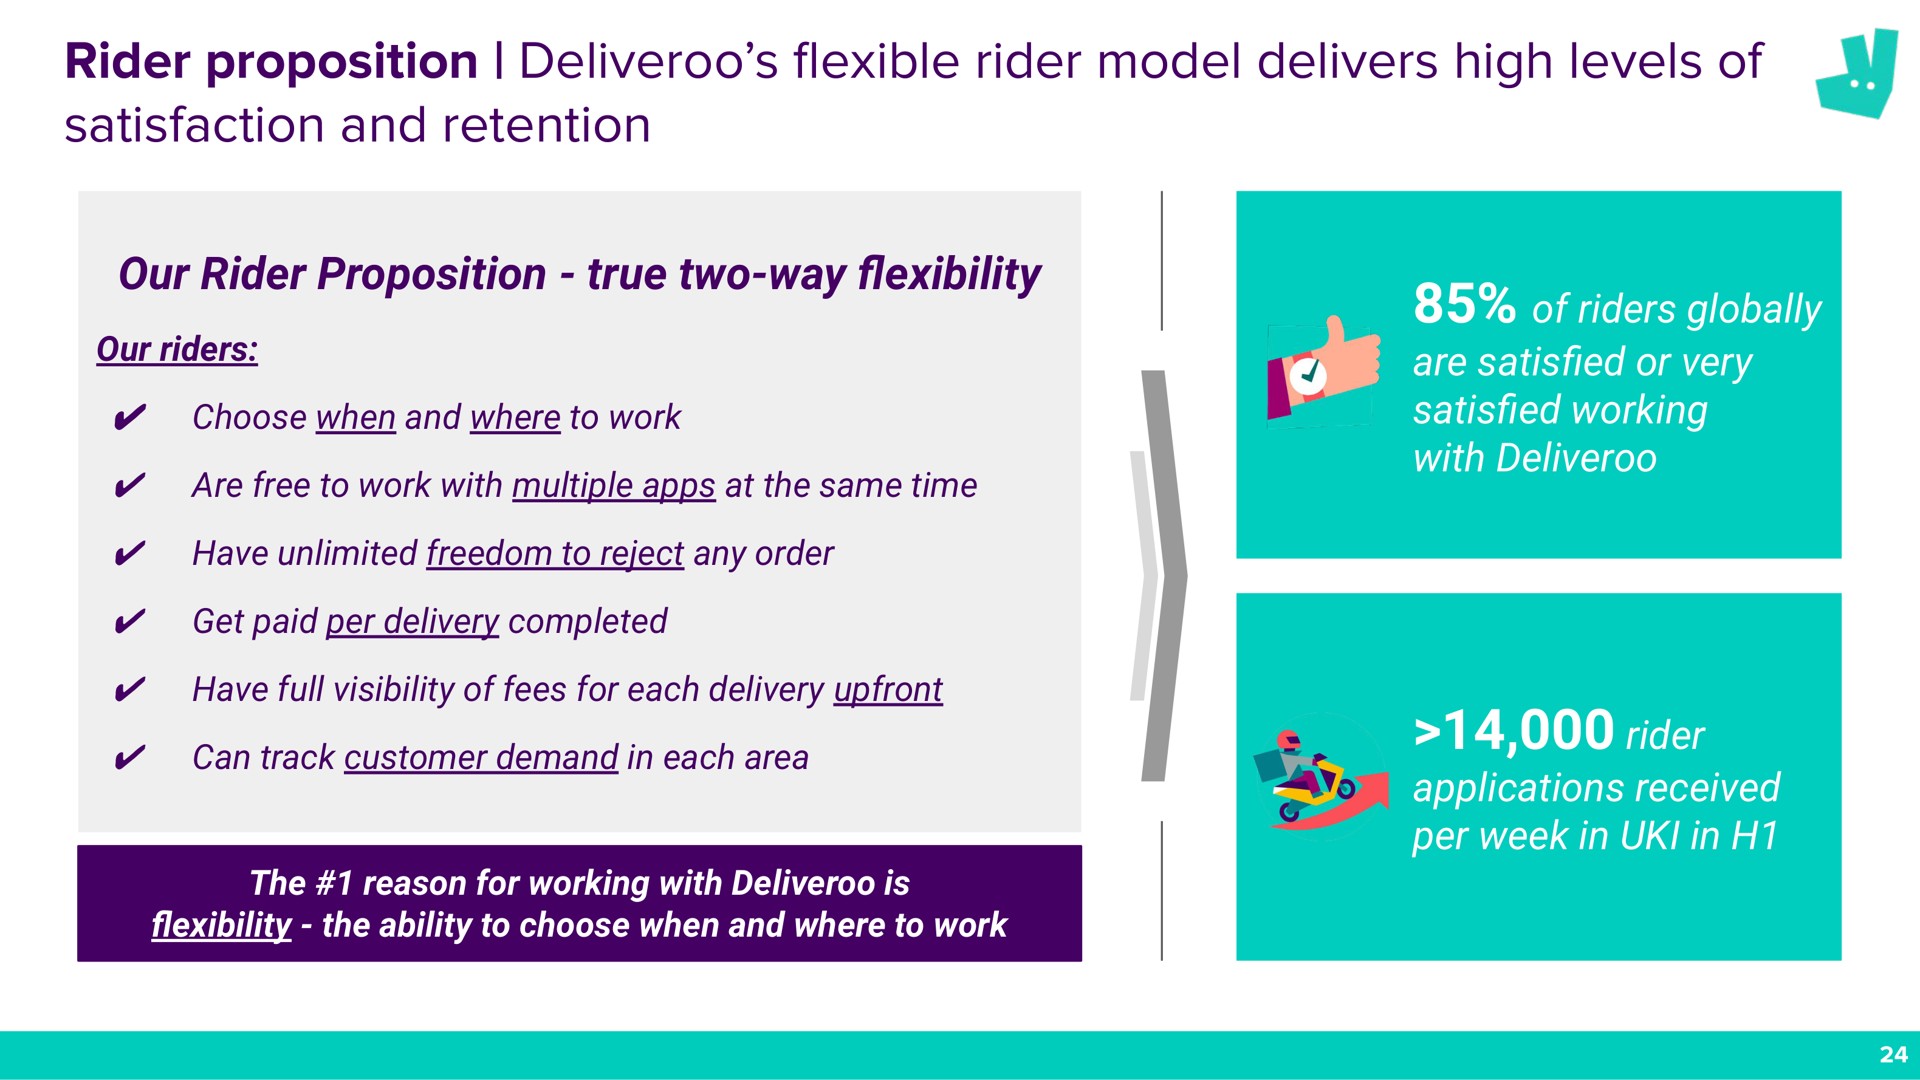 rider proposition rider model delivers high levels of satisfaction and retention flexible | Deliveroo